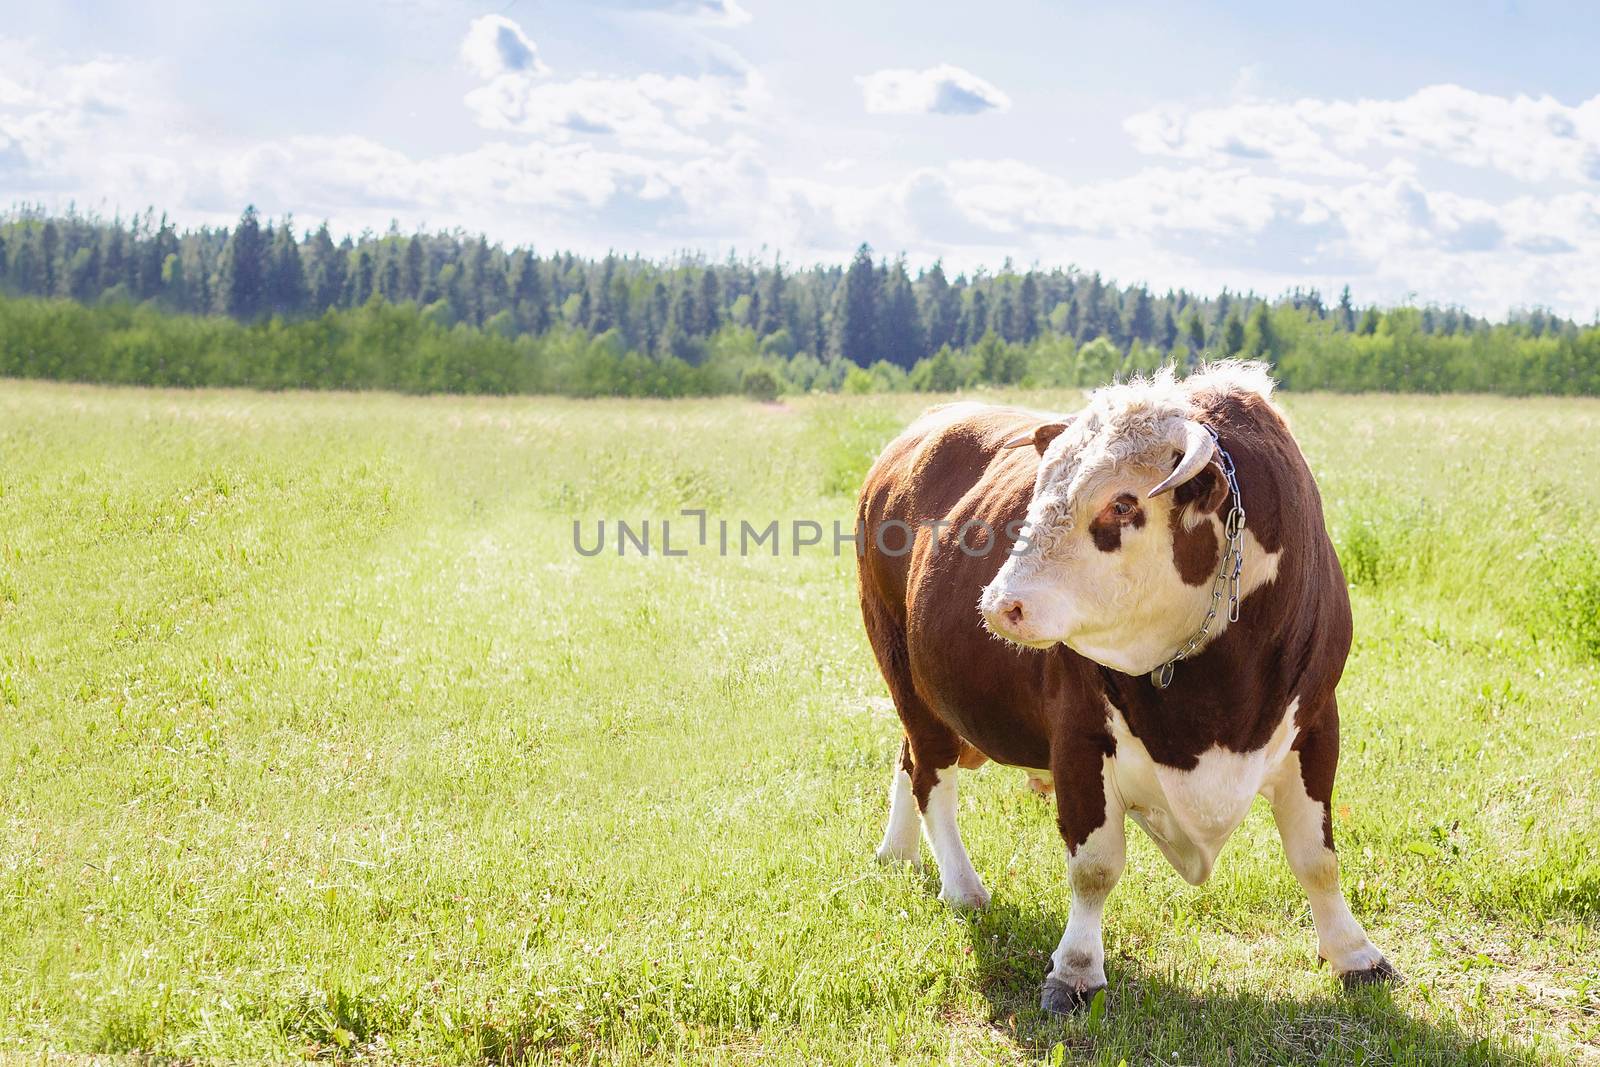 A bull, a big bull with a ring in its nose, stood majestically in a lush summer meadow by a wooden fence, a milk bull was grazing in a green meadow. Landscape, horizontal. Place to copy. by Pirlik